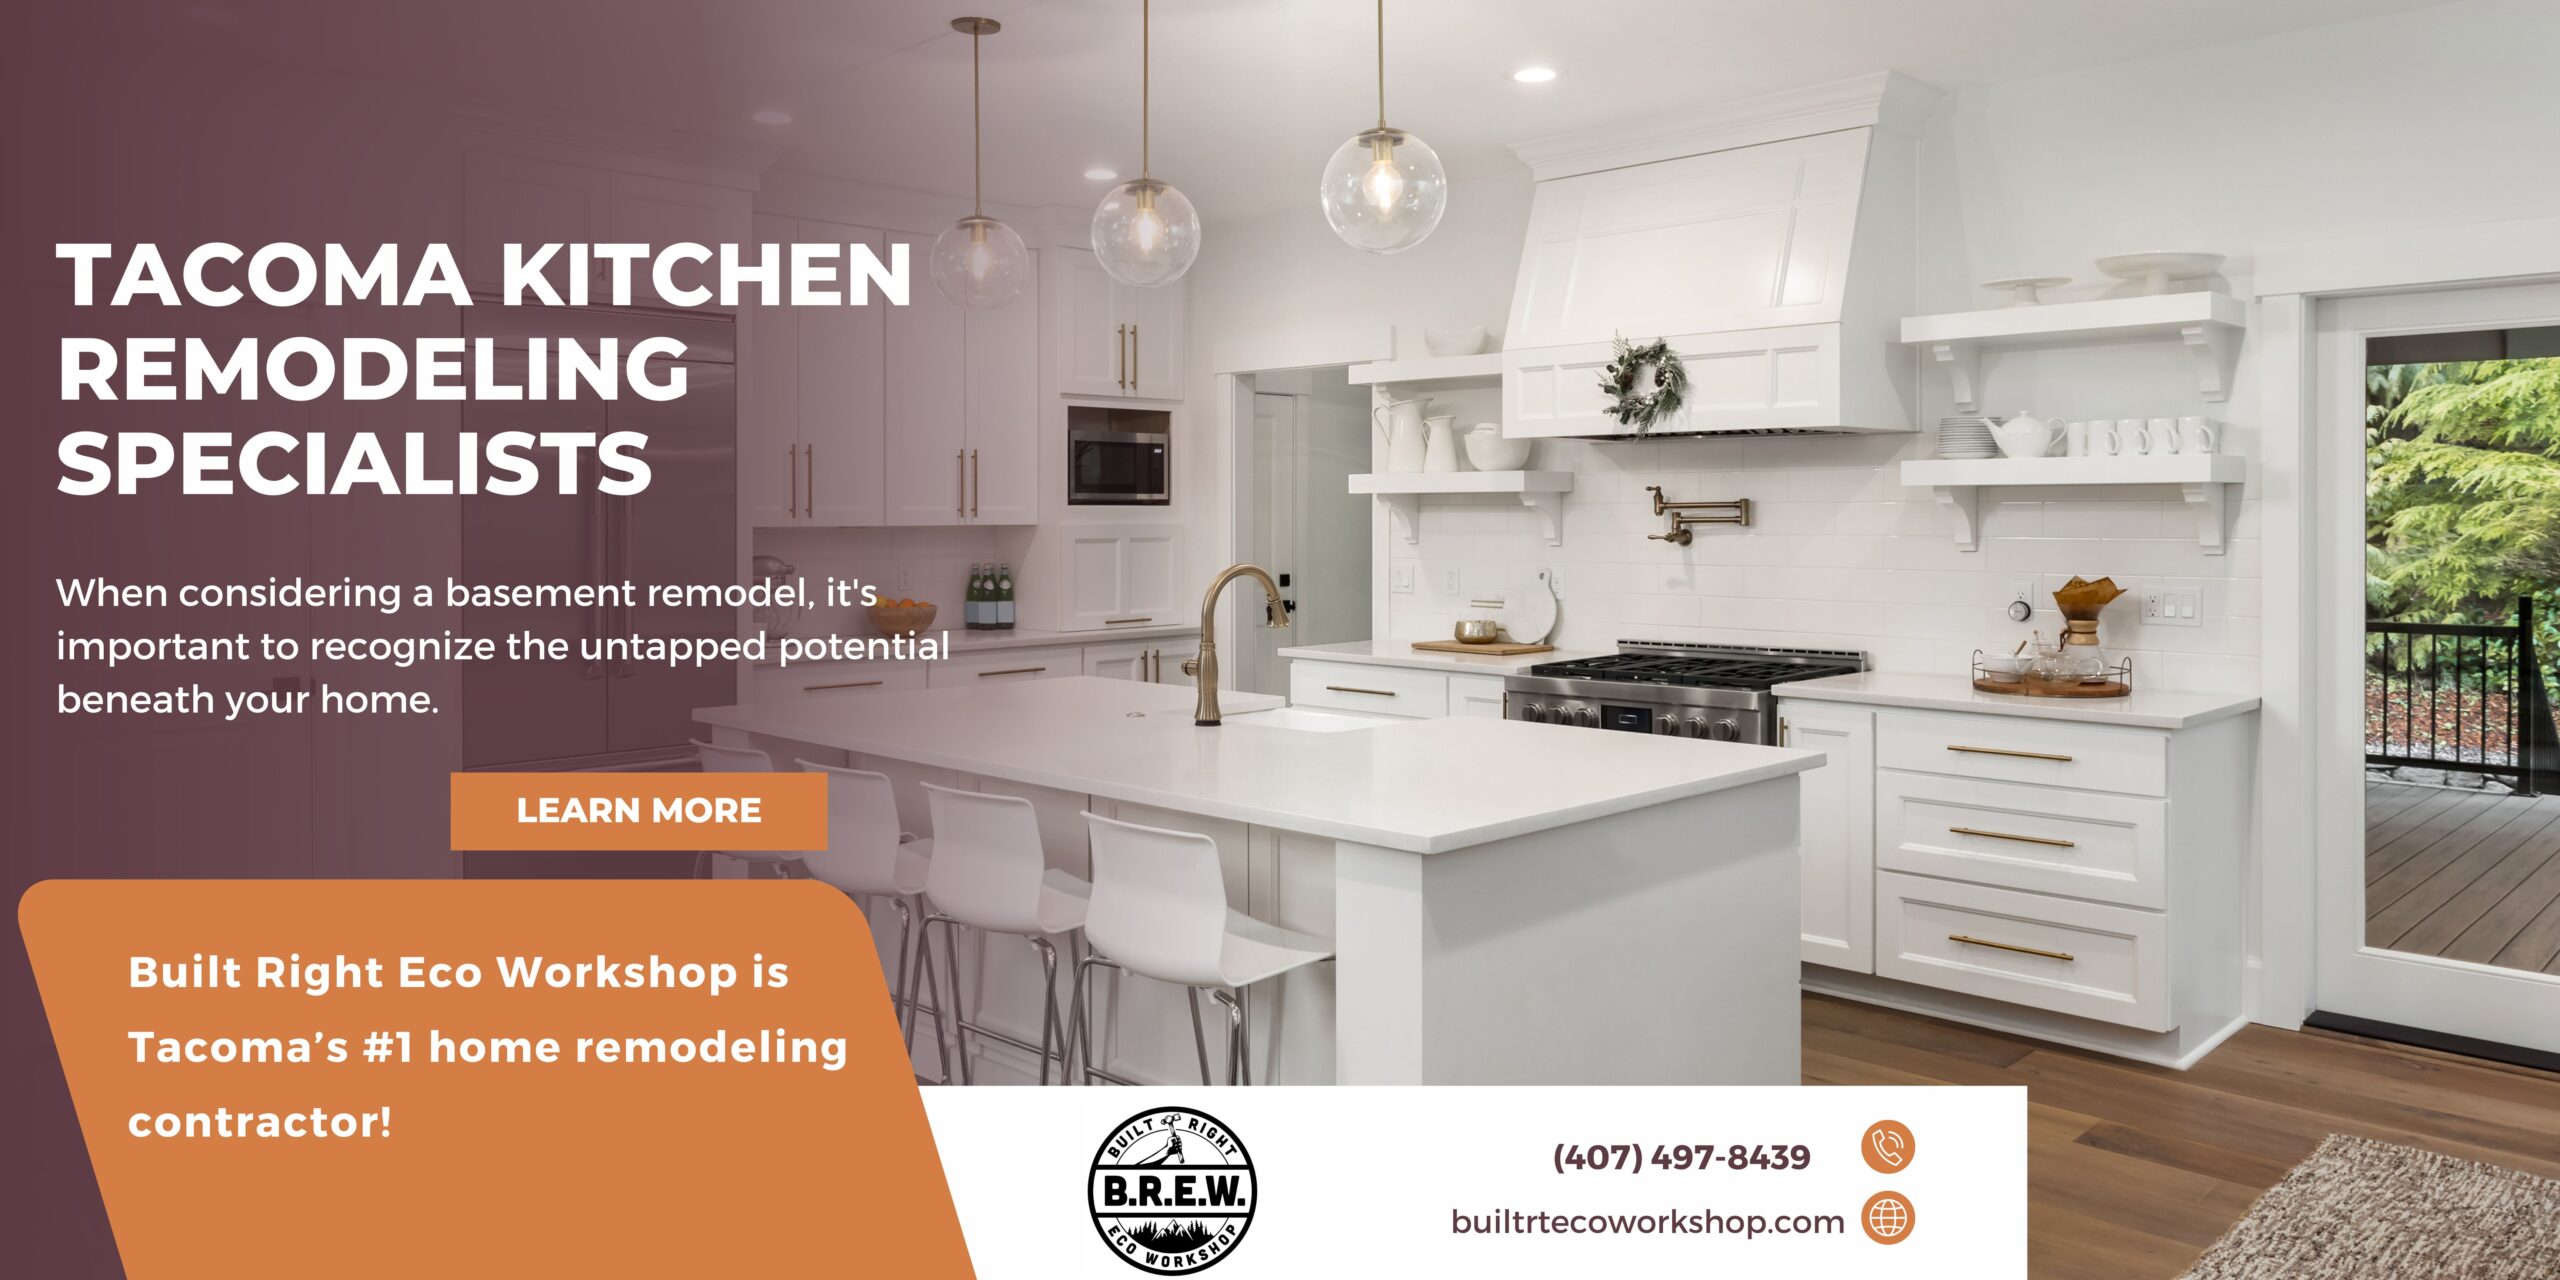 Tacoma Kitchen Remodeling Specialists